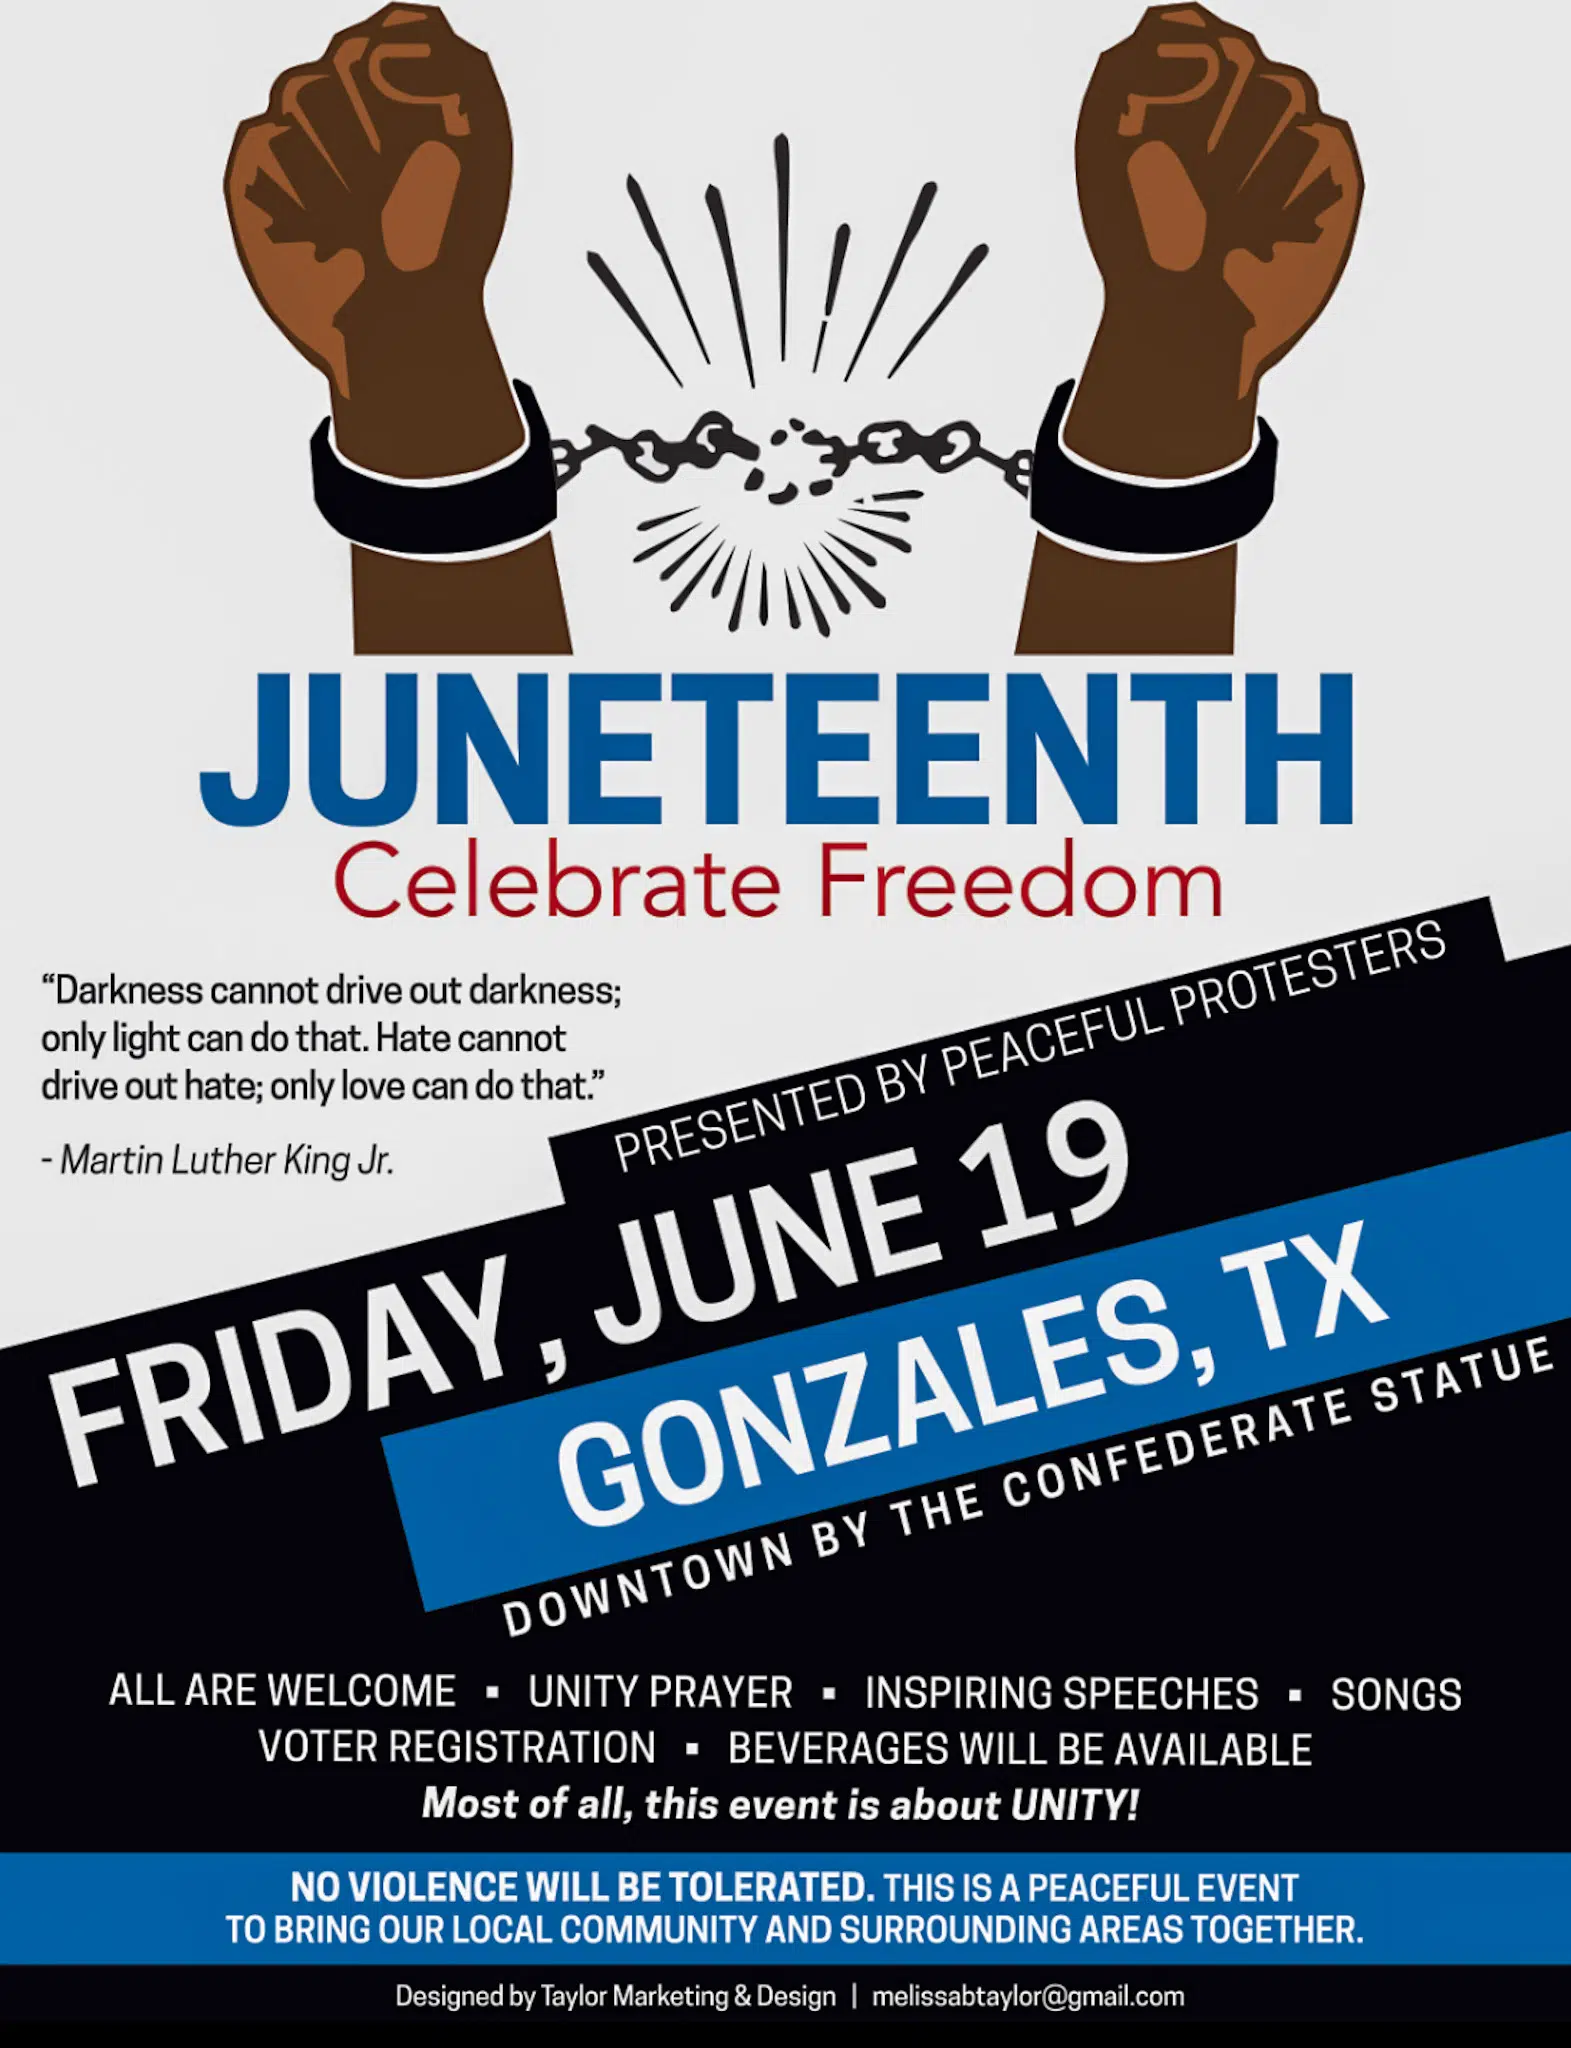 Seguin Guadalupe County Receives Special Invite To Juneteenth